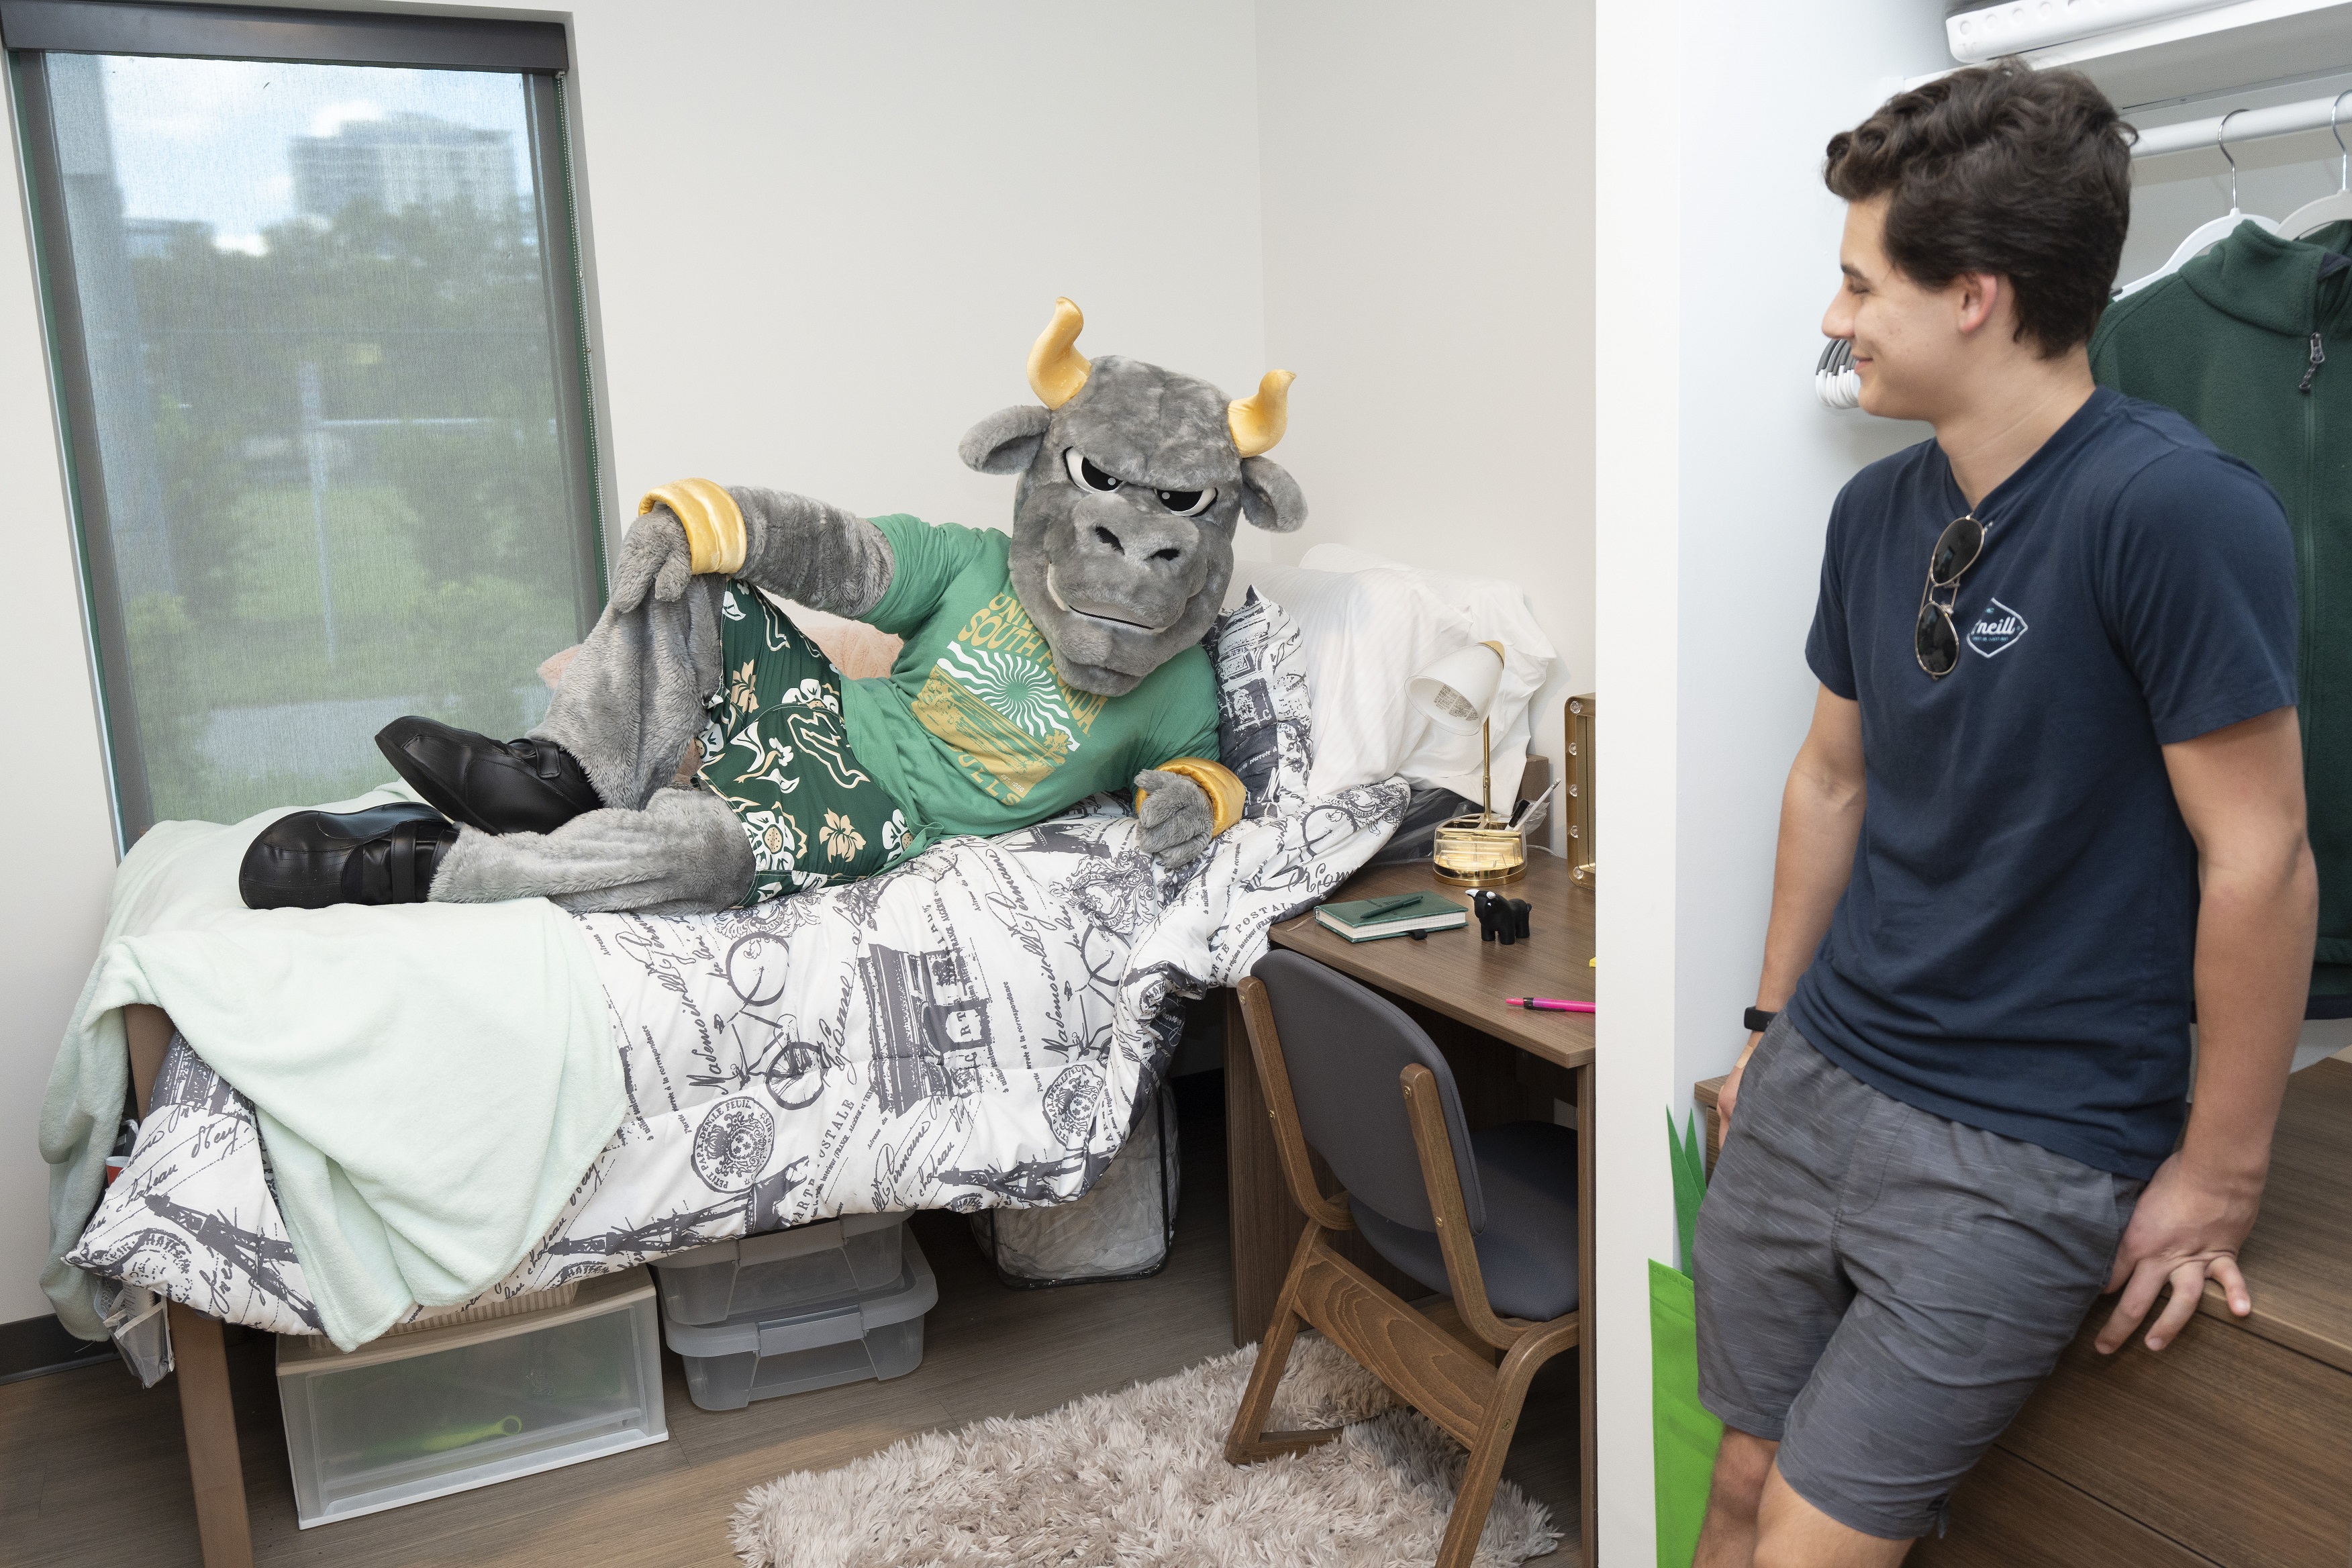 Rocky the Bull lounges on bed while student looks at him. 